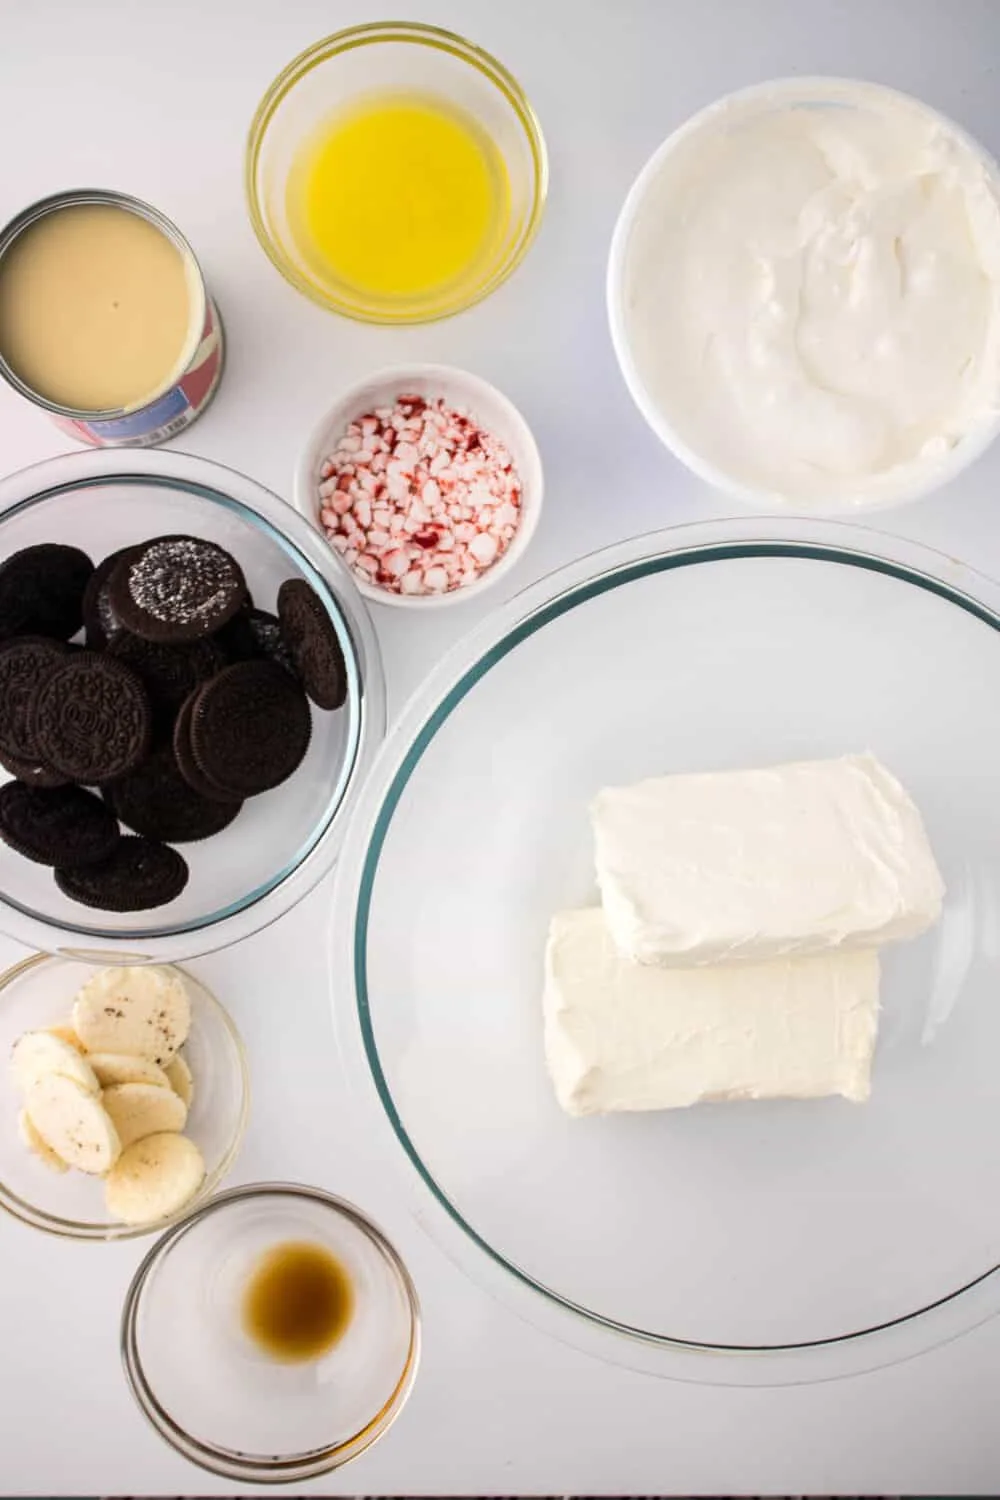 Ingredients required to make No-Bake Peppermint Cheesecake Jars. Ingredients are presented in glass bowls.